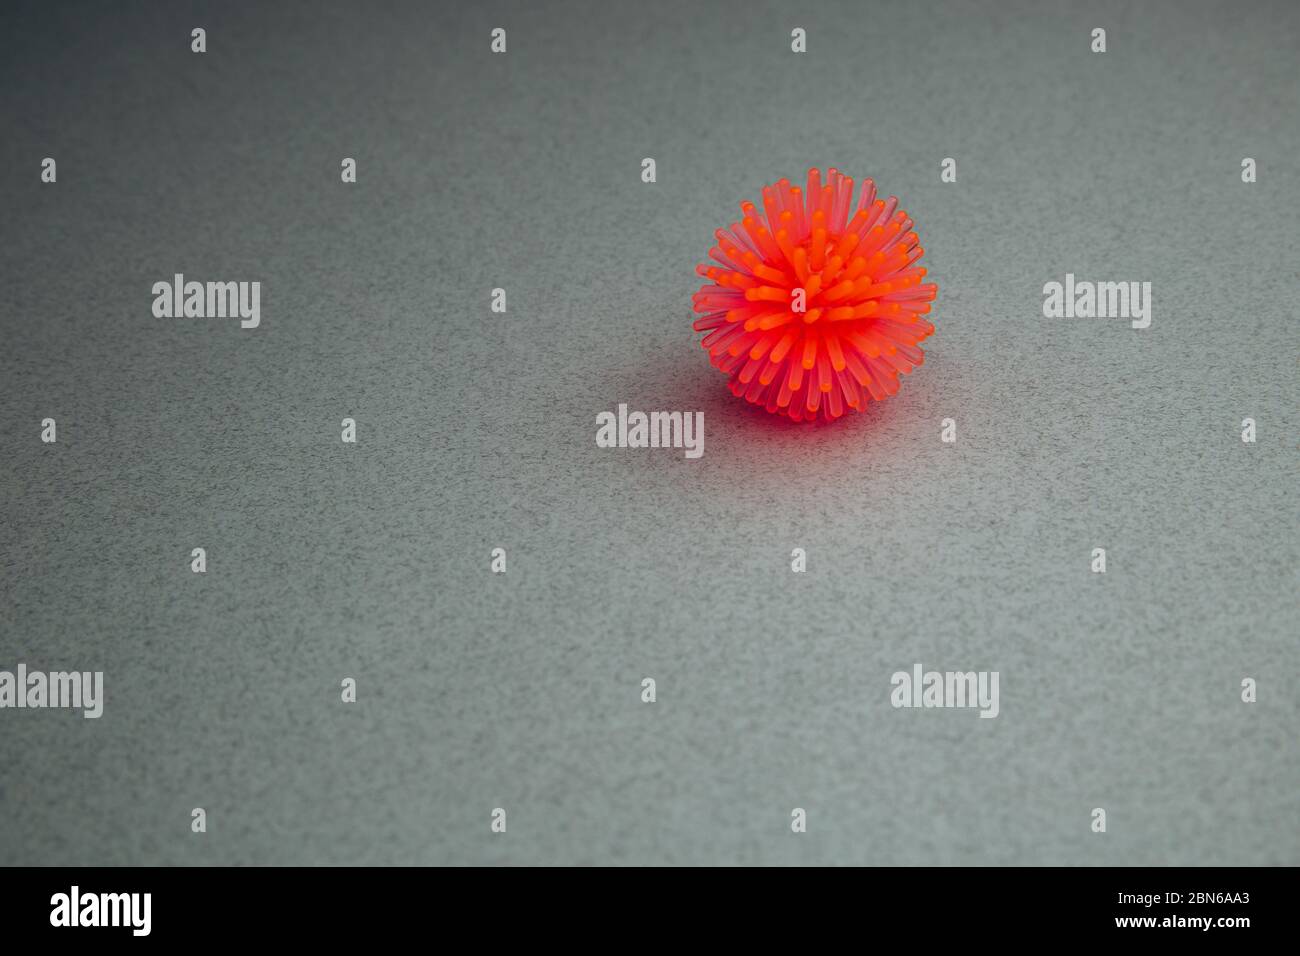 Abstract virus strain model of Coronavirus disease COVID-19 on a grey background. Virus Pandemic Protection Concept. Copy space. Stock Photo